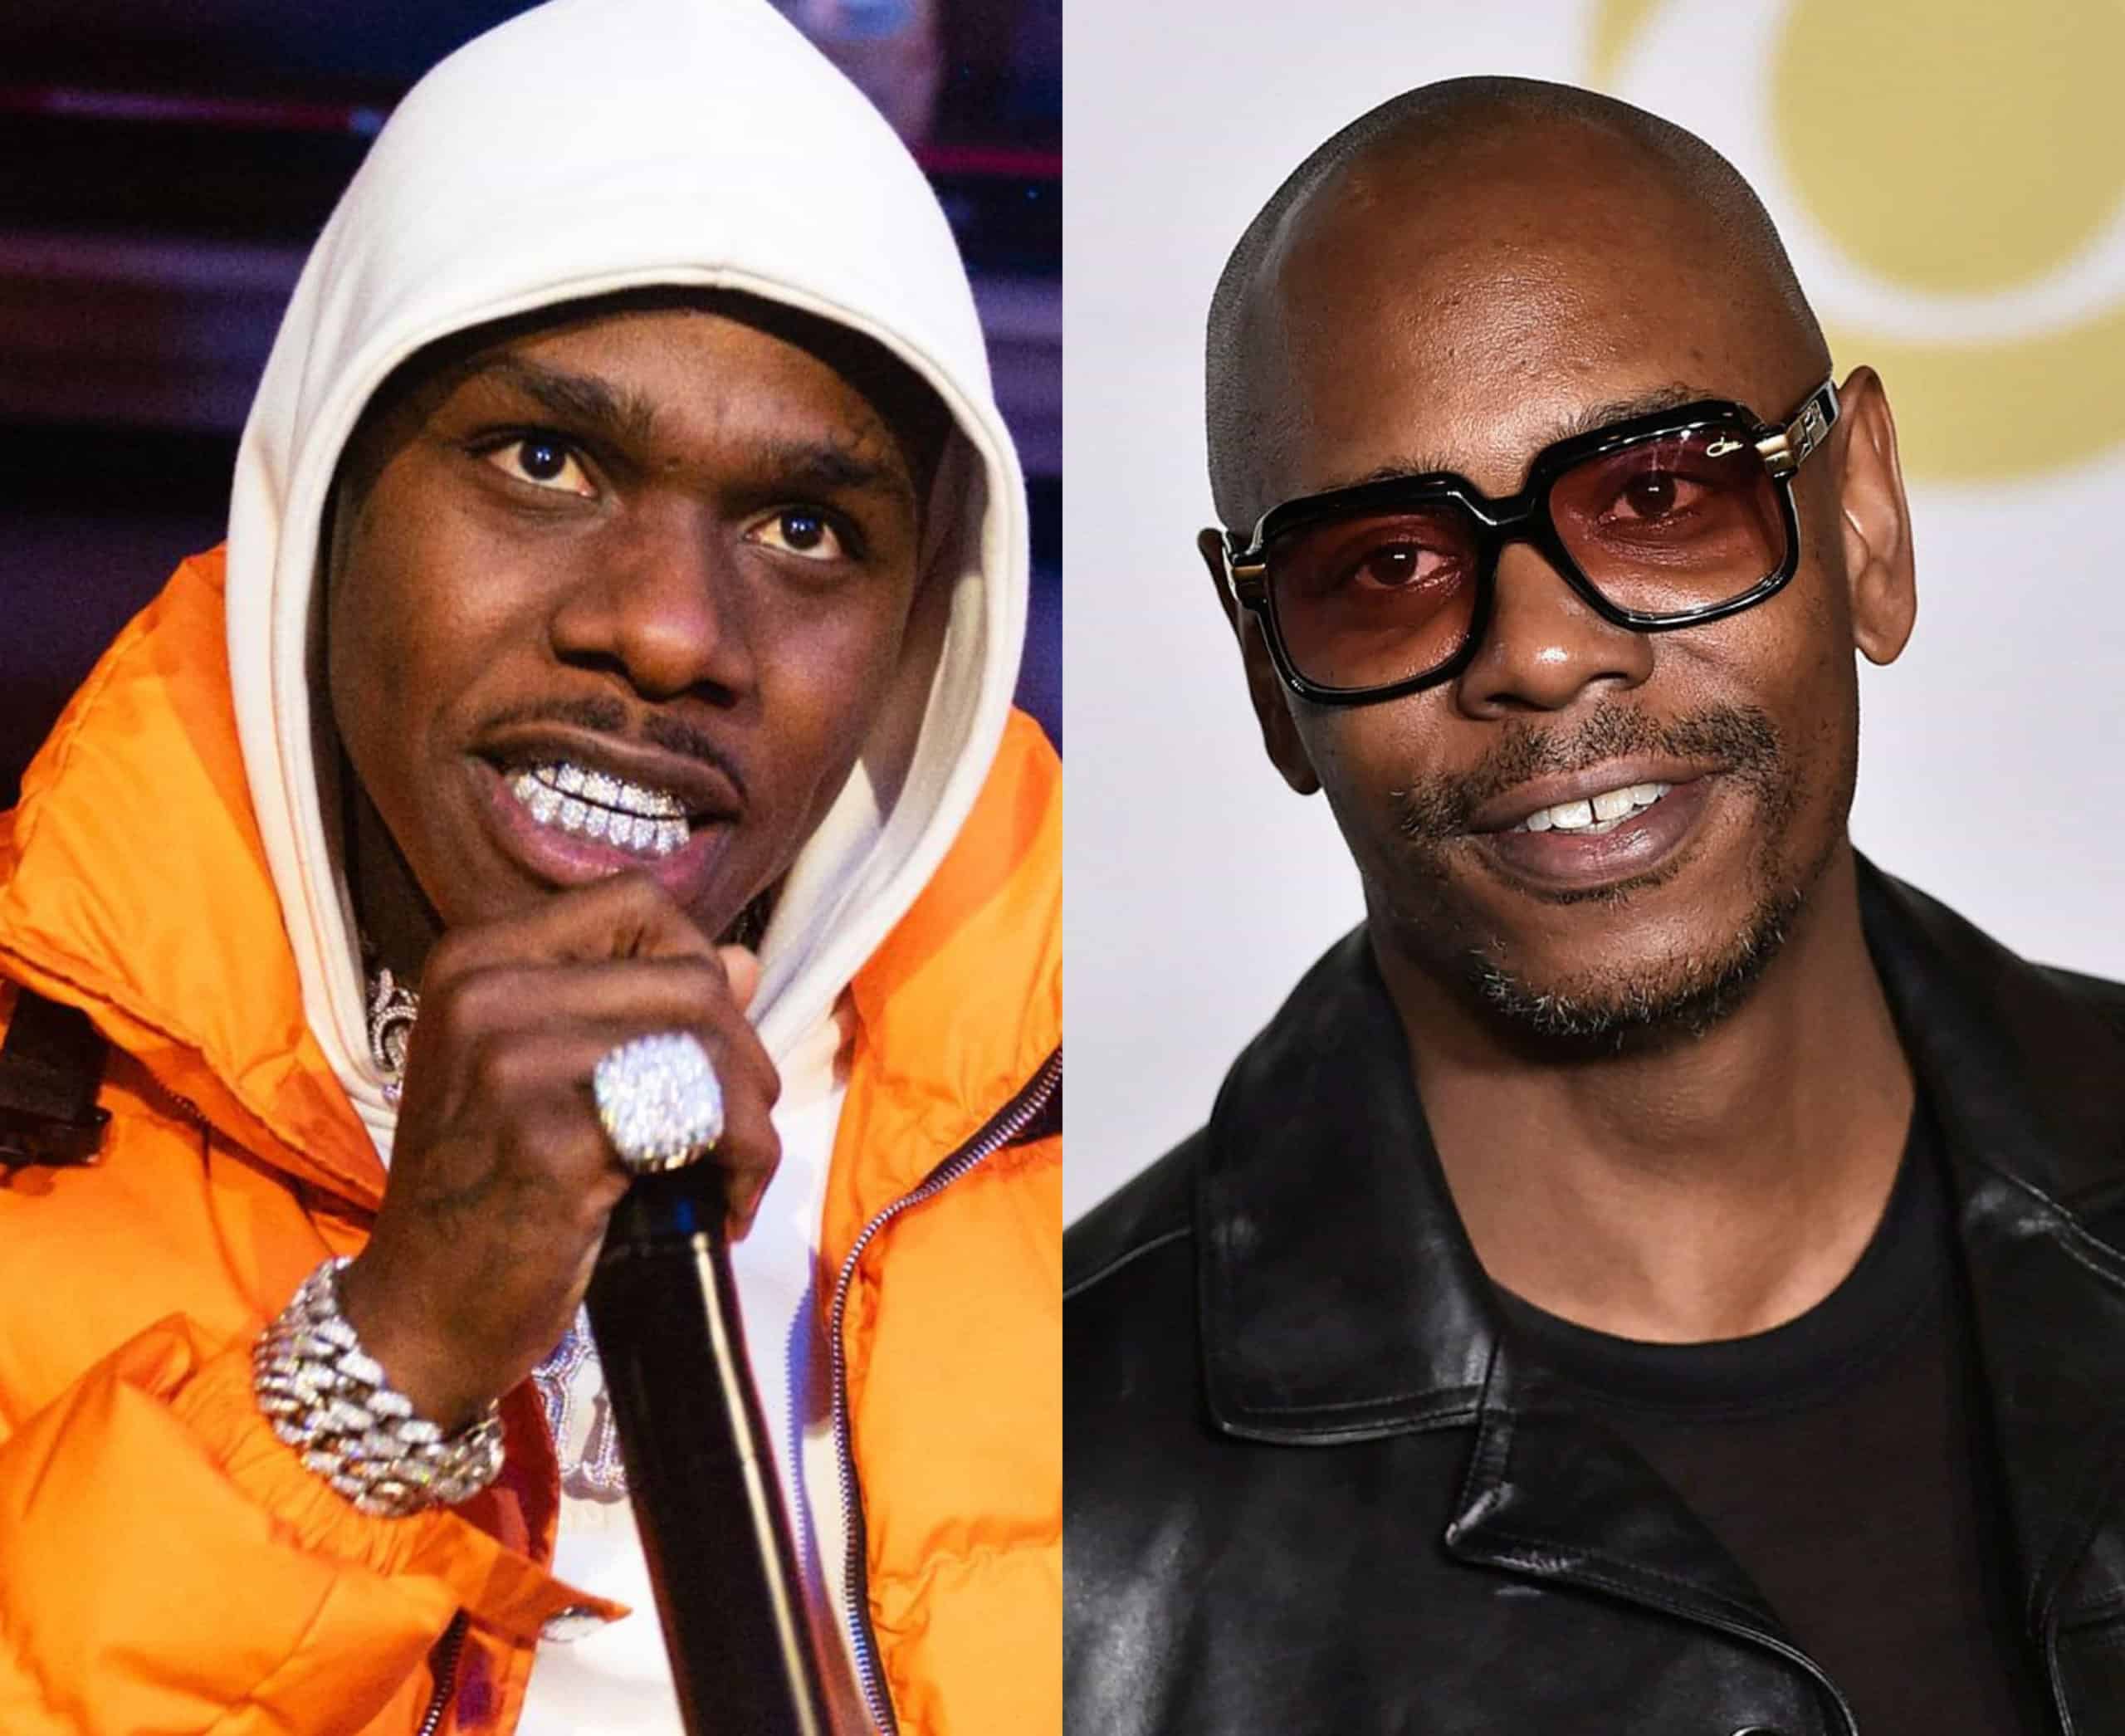 LGBTQ Organization Forgives DaBaby, But Not Dave Chappelle